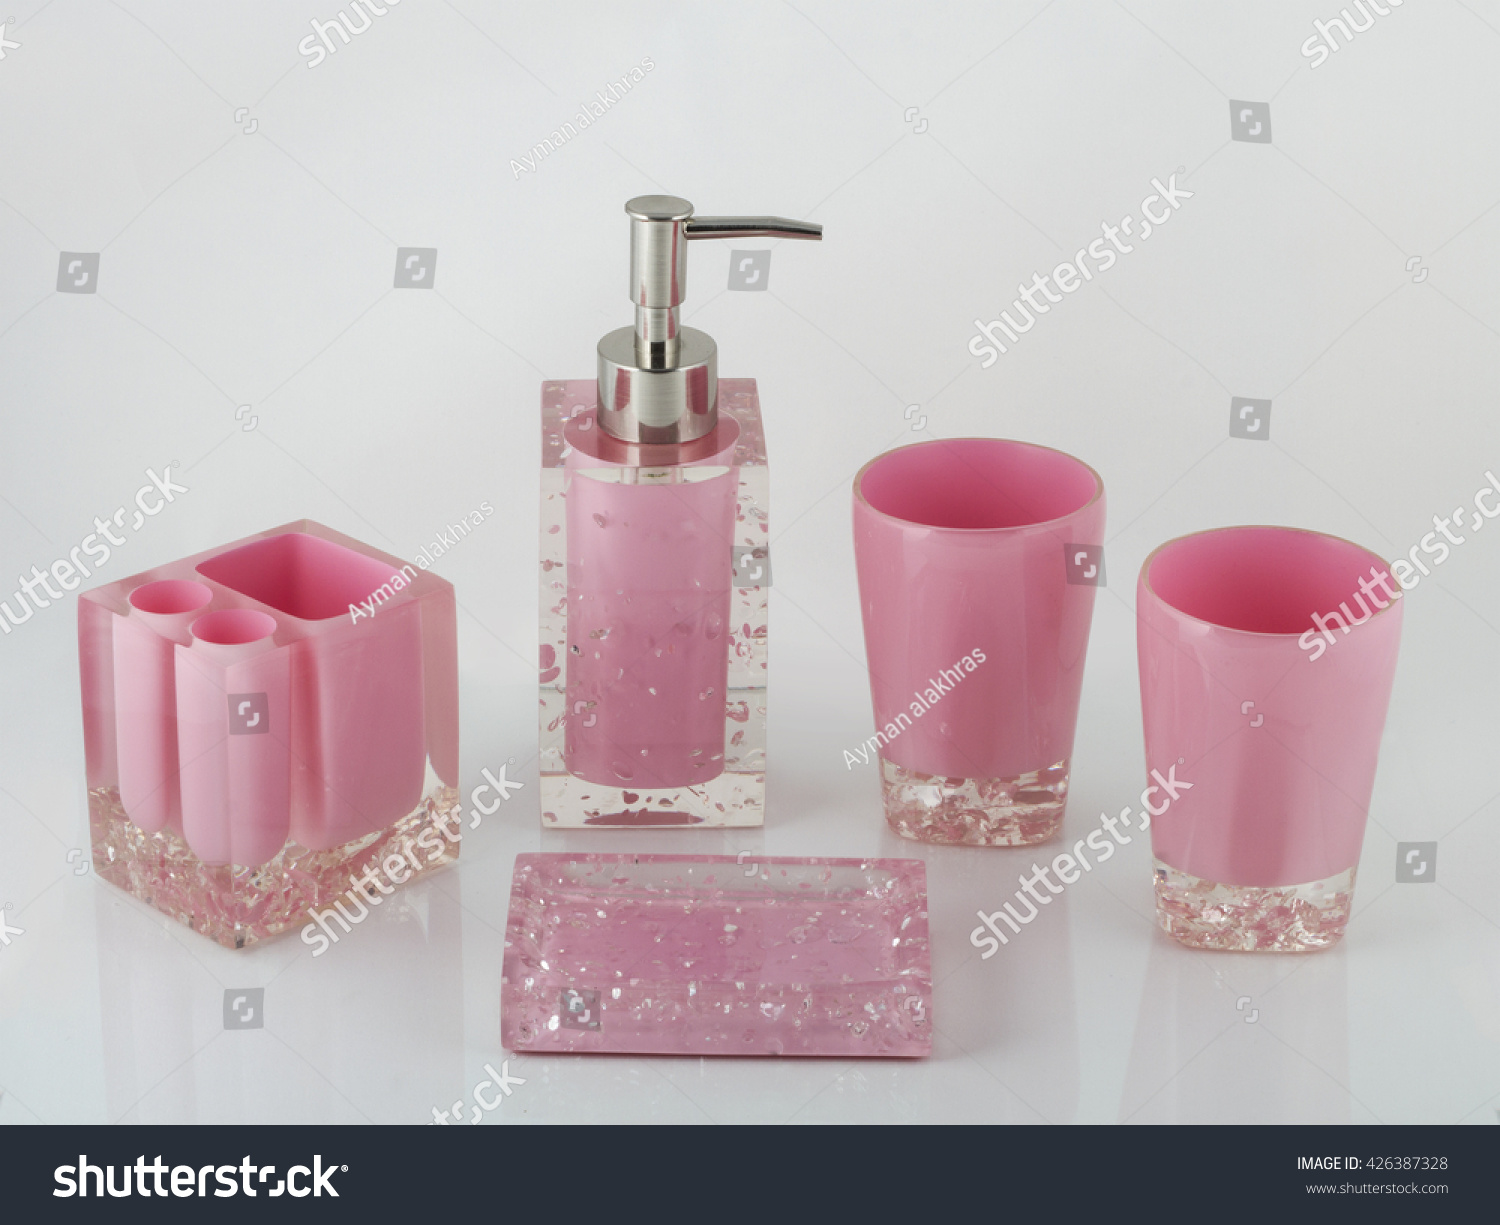 Pink Bathroom Accessories Reflection On Gray Stock Photo Edit Now